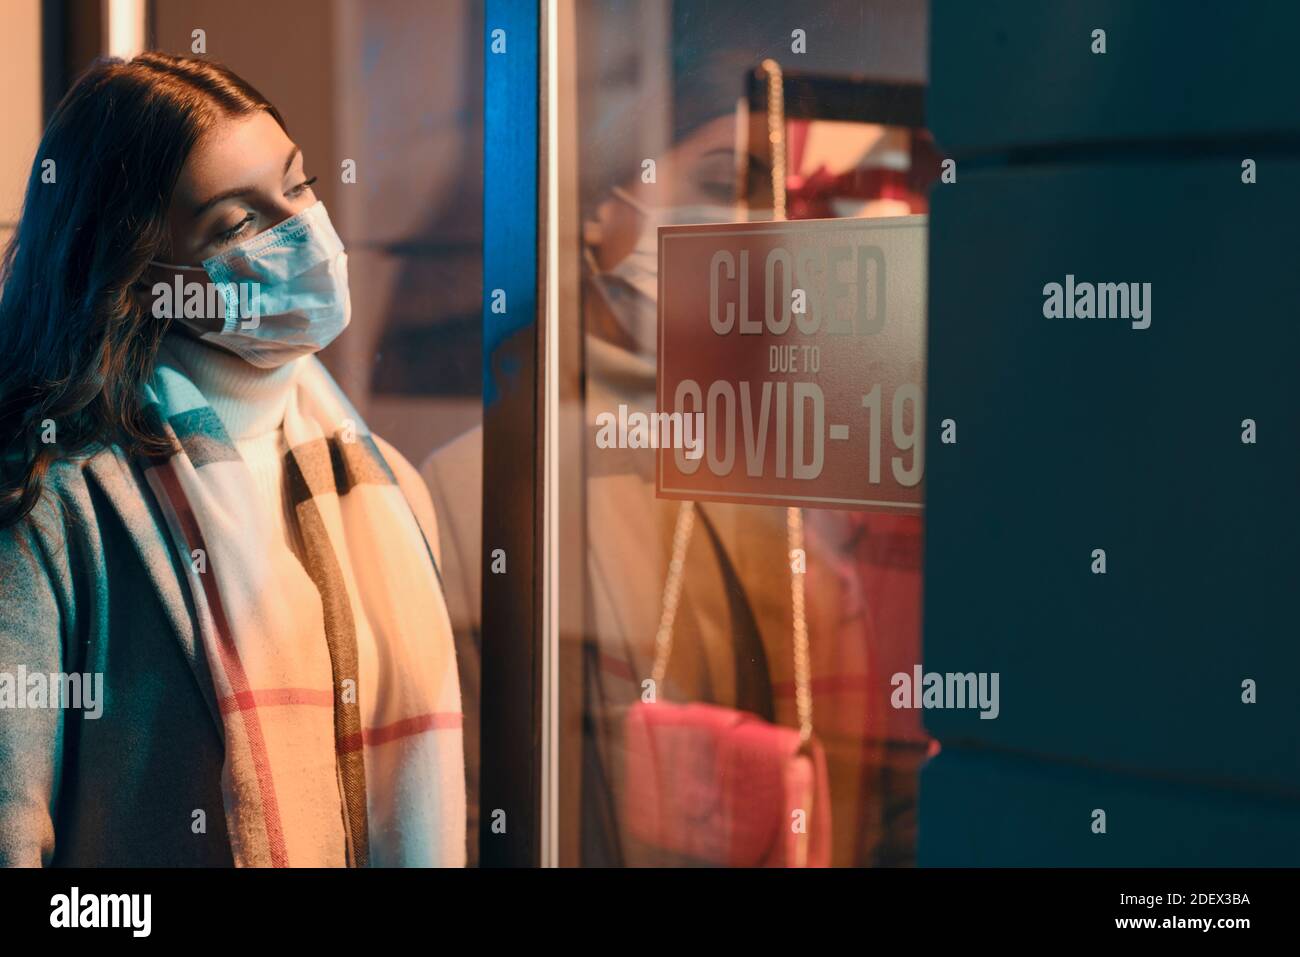 Store closed due to coronavirus covid-19 outbreak, a woman with surgical mask is reading the sign Stock Photo